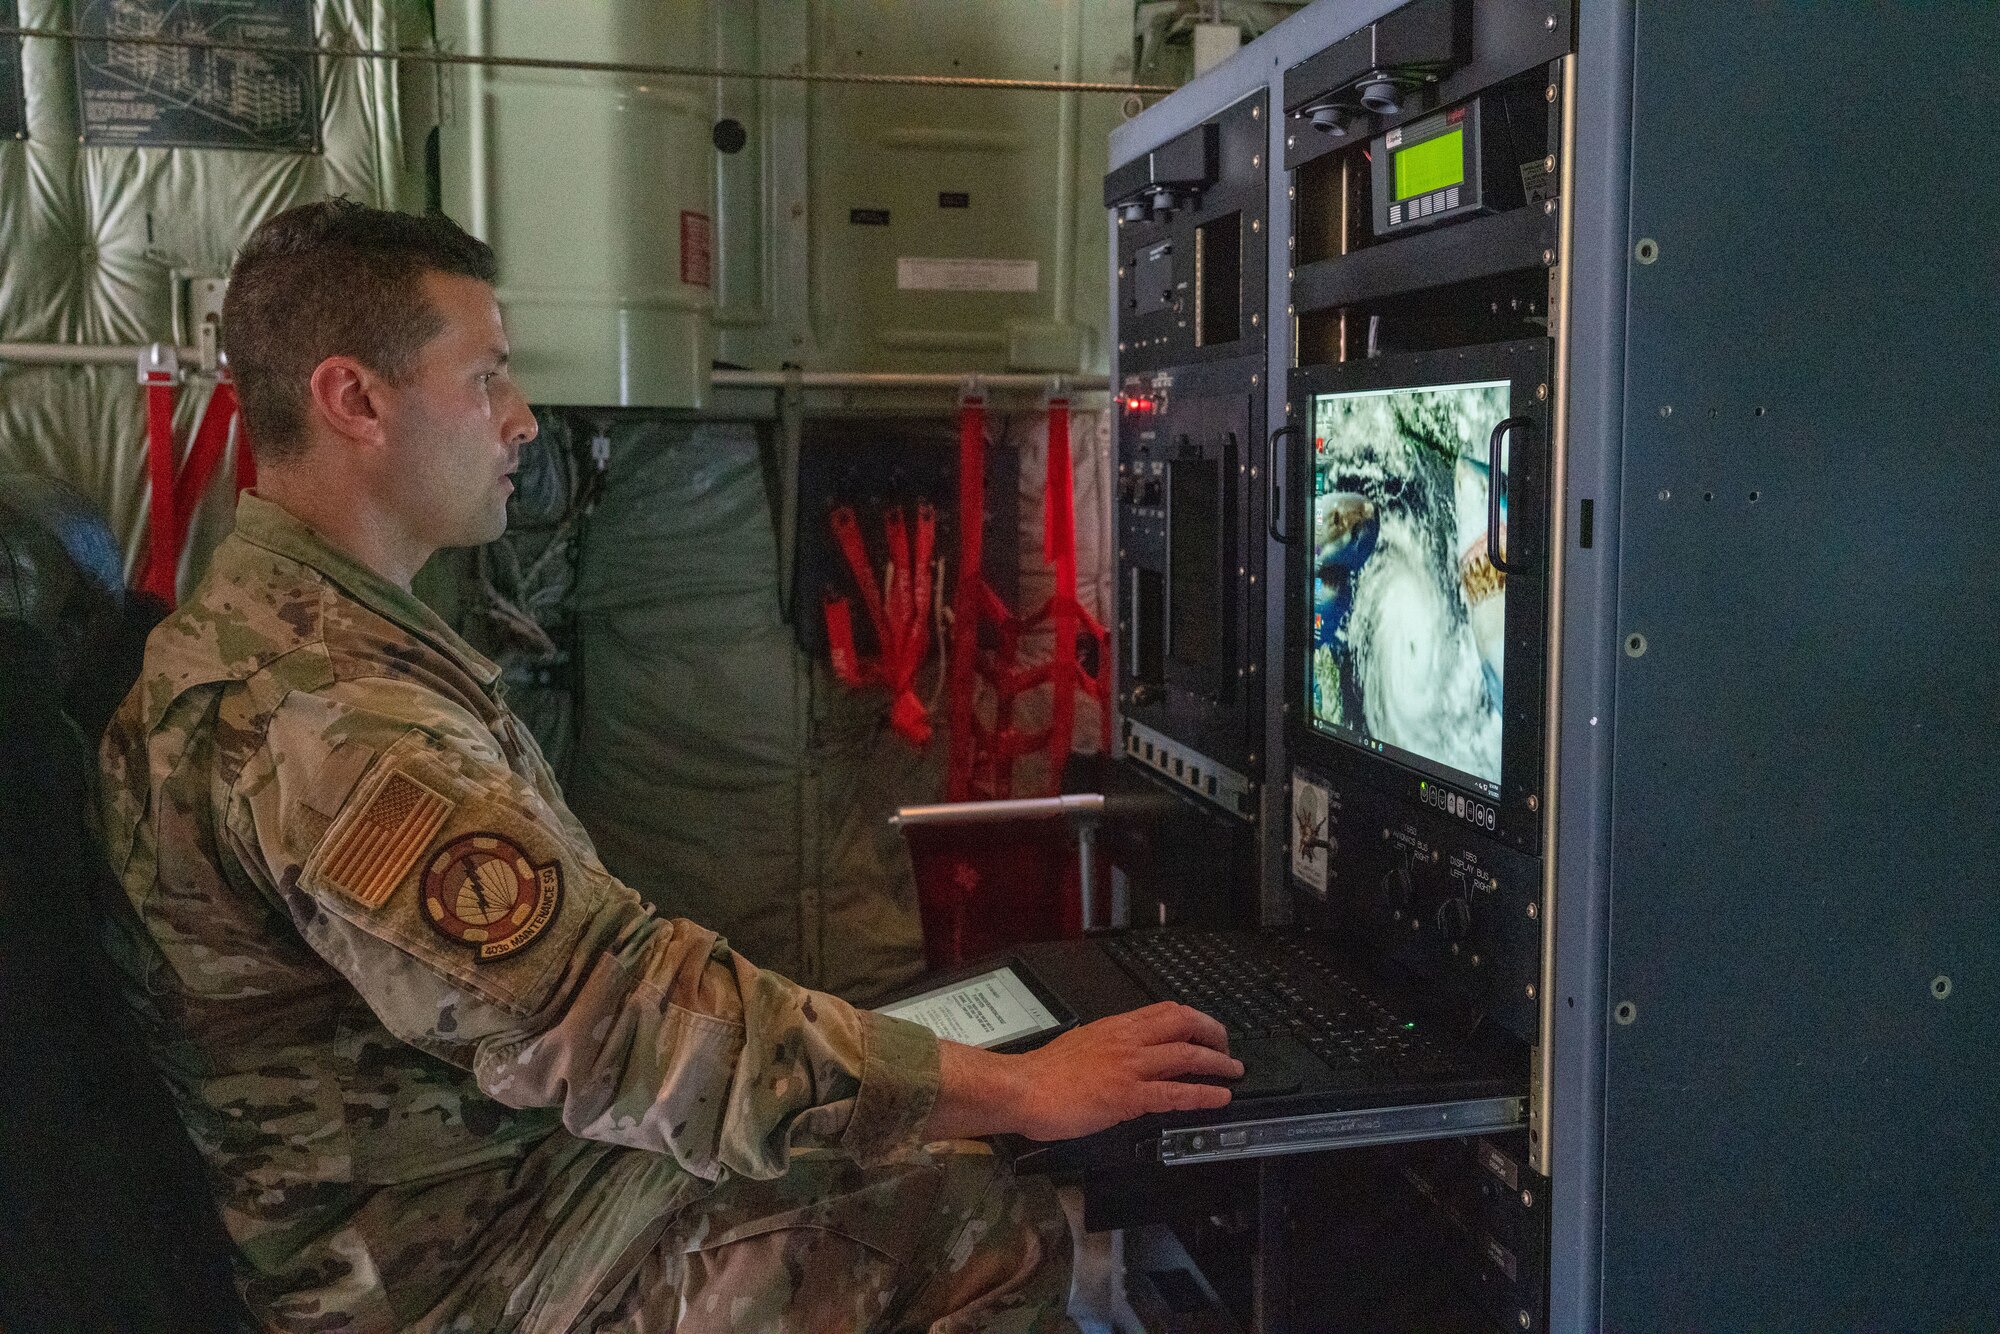 Senior Airman Warren Reynier, 403rd Maintenance Squadron meteorology technician, runs an operations check on the upgraded monitor of the aerial reconnaissance weather officer station at Keesler Air Force Base, Miss., May 13, 2021. The 53rd Weather Reconnaissance Squadron “Hurricane Hunters’” ARWO and loadmaster/dropsonde operator stations are being upgraded with hardware and software to increase their weather collecting capabilities. (U.S. Air Force photo by 2nd Lt. Christopher Carranza)